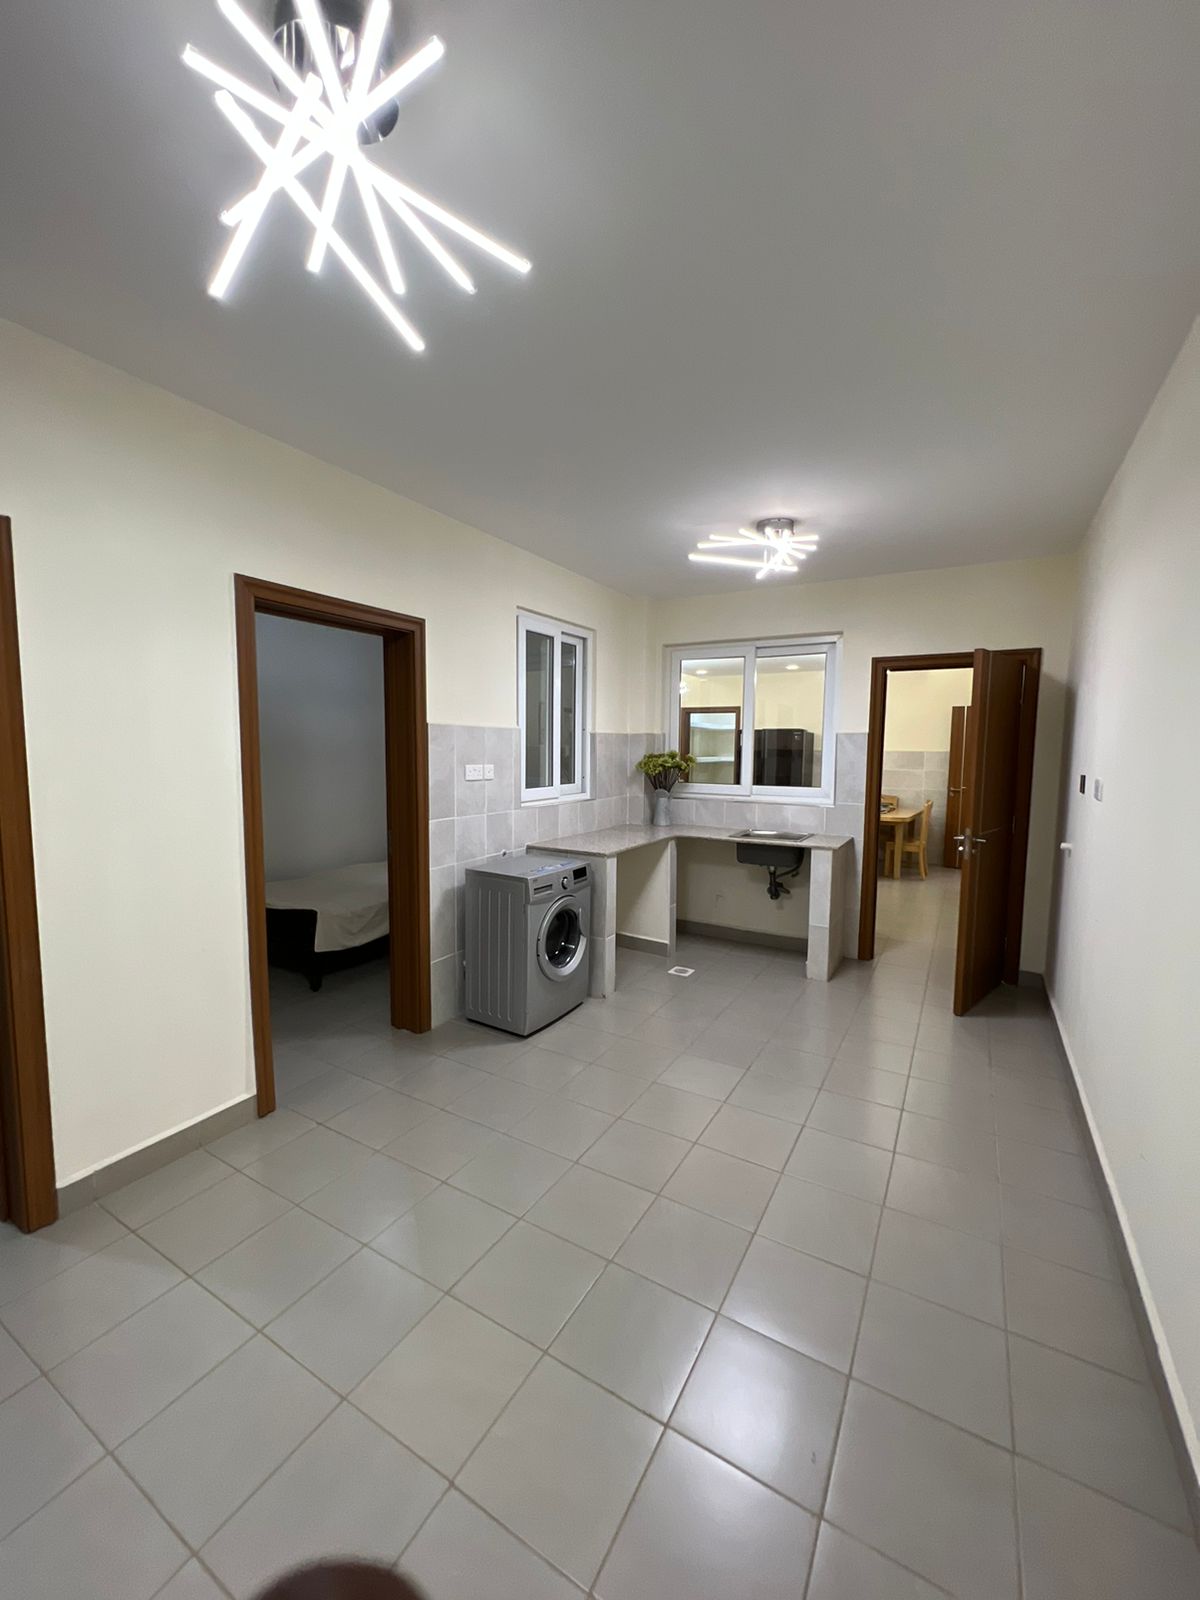 1 Bedroom Apartment in Westlands, Nairobi. Backup generators in all areas. High speed lifts. Intercom. 2 parking spaces per apartment. 9.2 Million Musilli Homes